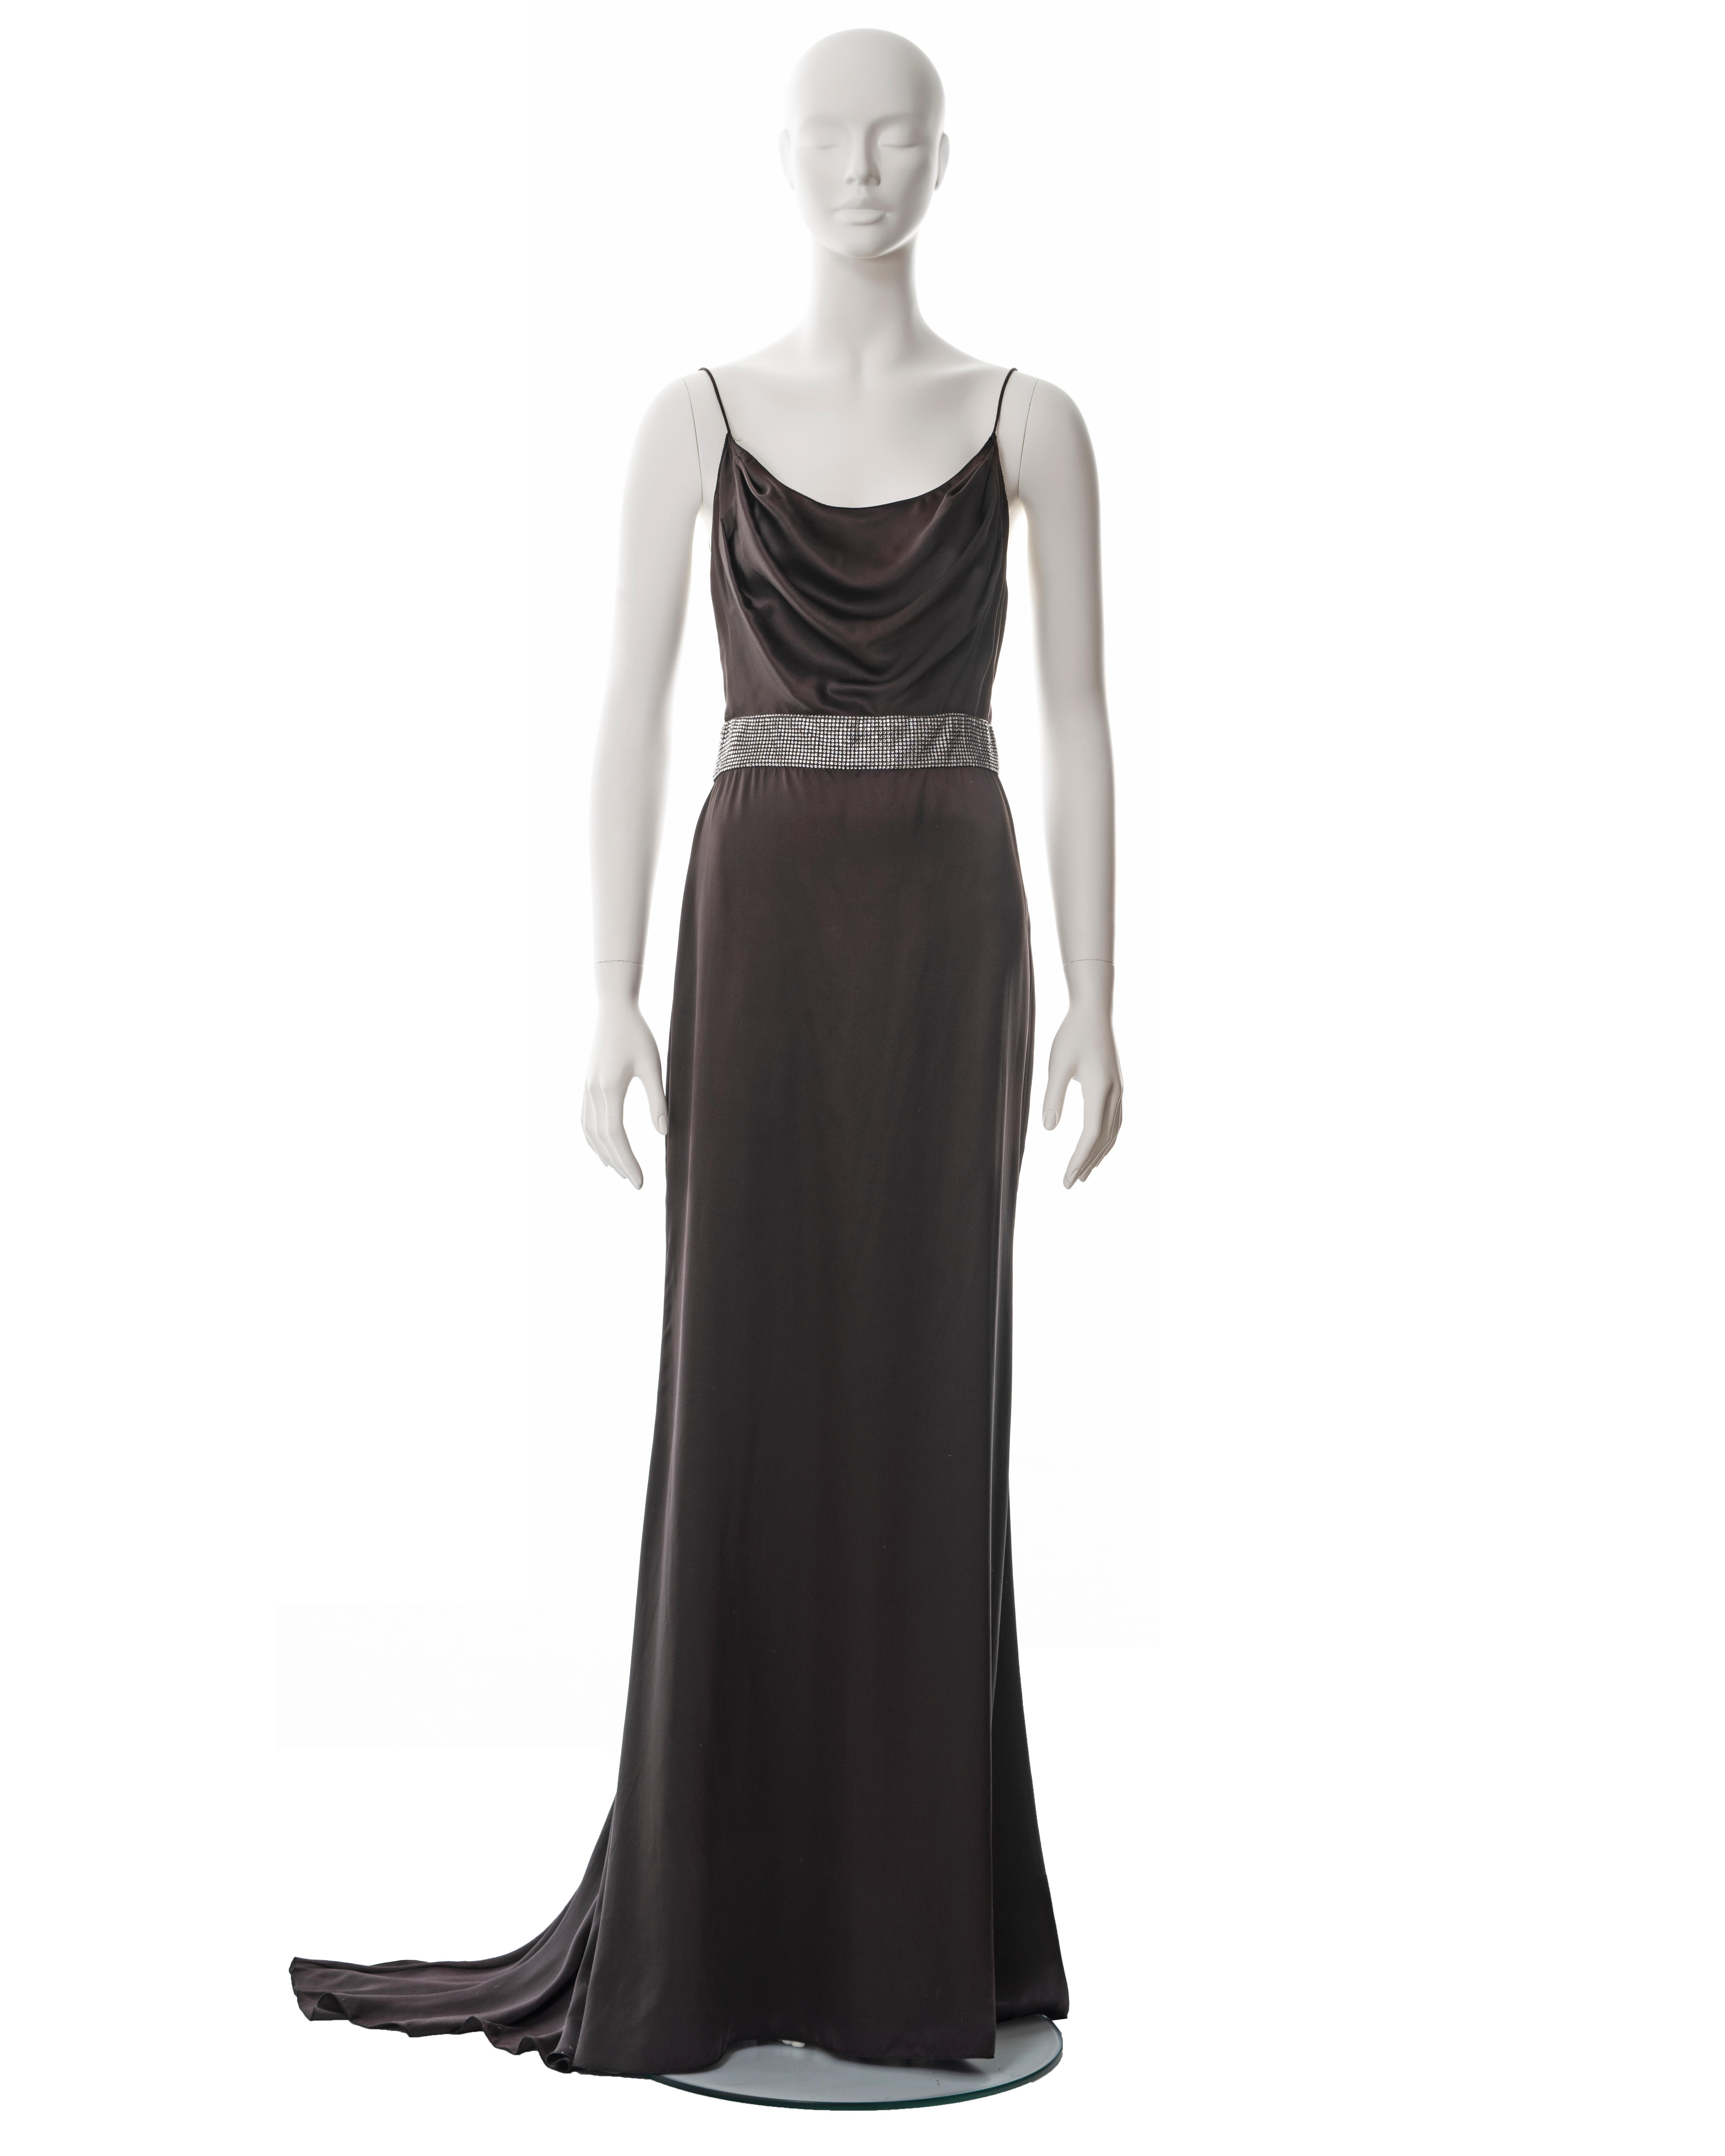 ▪ Dolce & Gabbana silk brown evening dress
▪ Sold by One of a Kind Archive
▪ Fall-Winter 2005
▪ Cowl neck
▪ Crystal waistband 
▪ Back zip fastening 
▪ Floor-length skirt with train 
▪ IT 40 - FR 36 - UK 8
▪ Made in Italy

All photographs in this